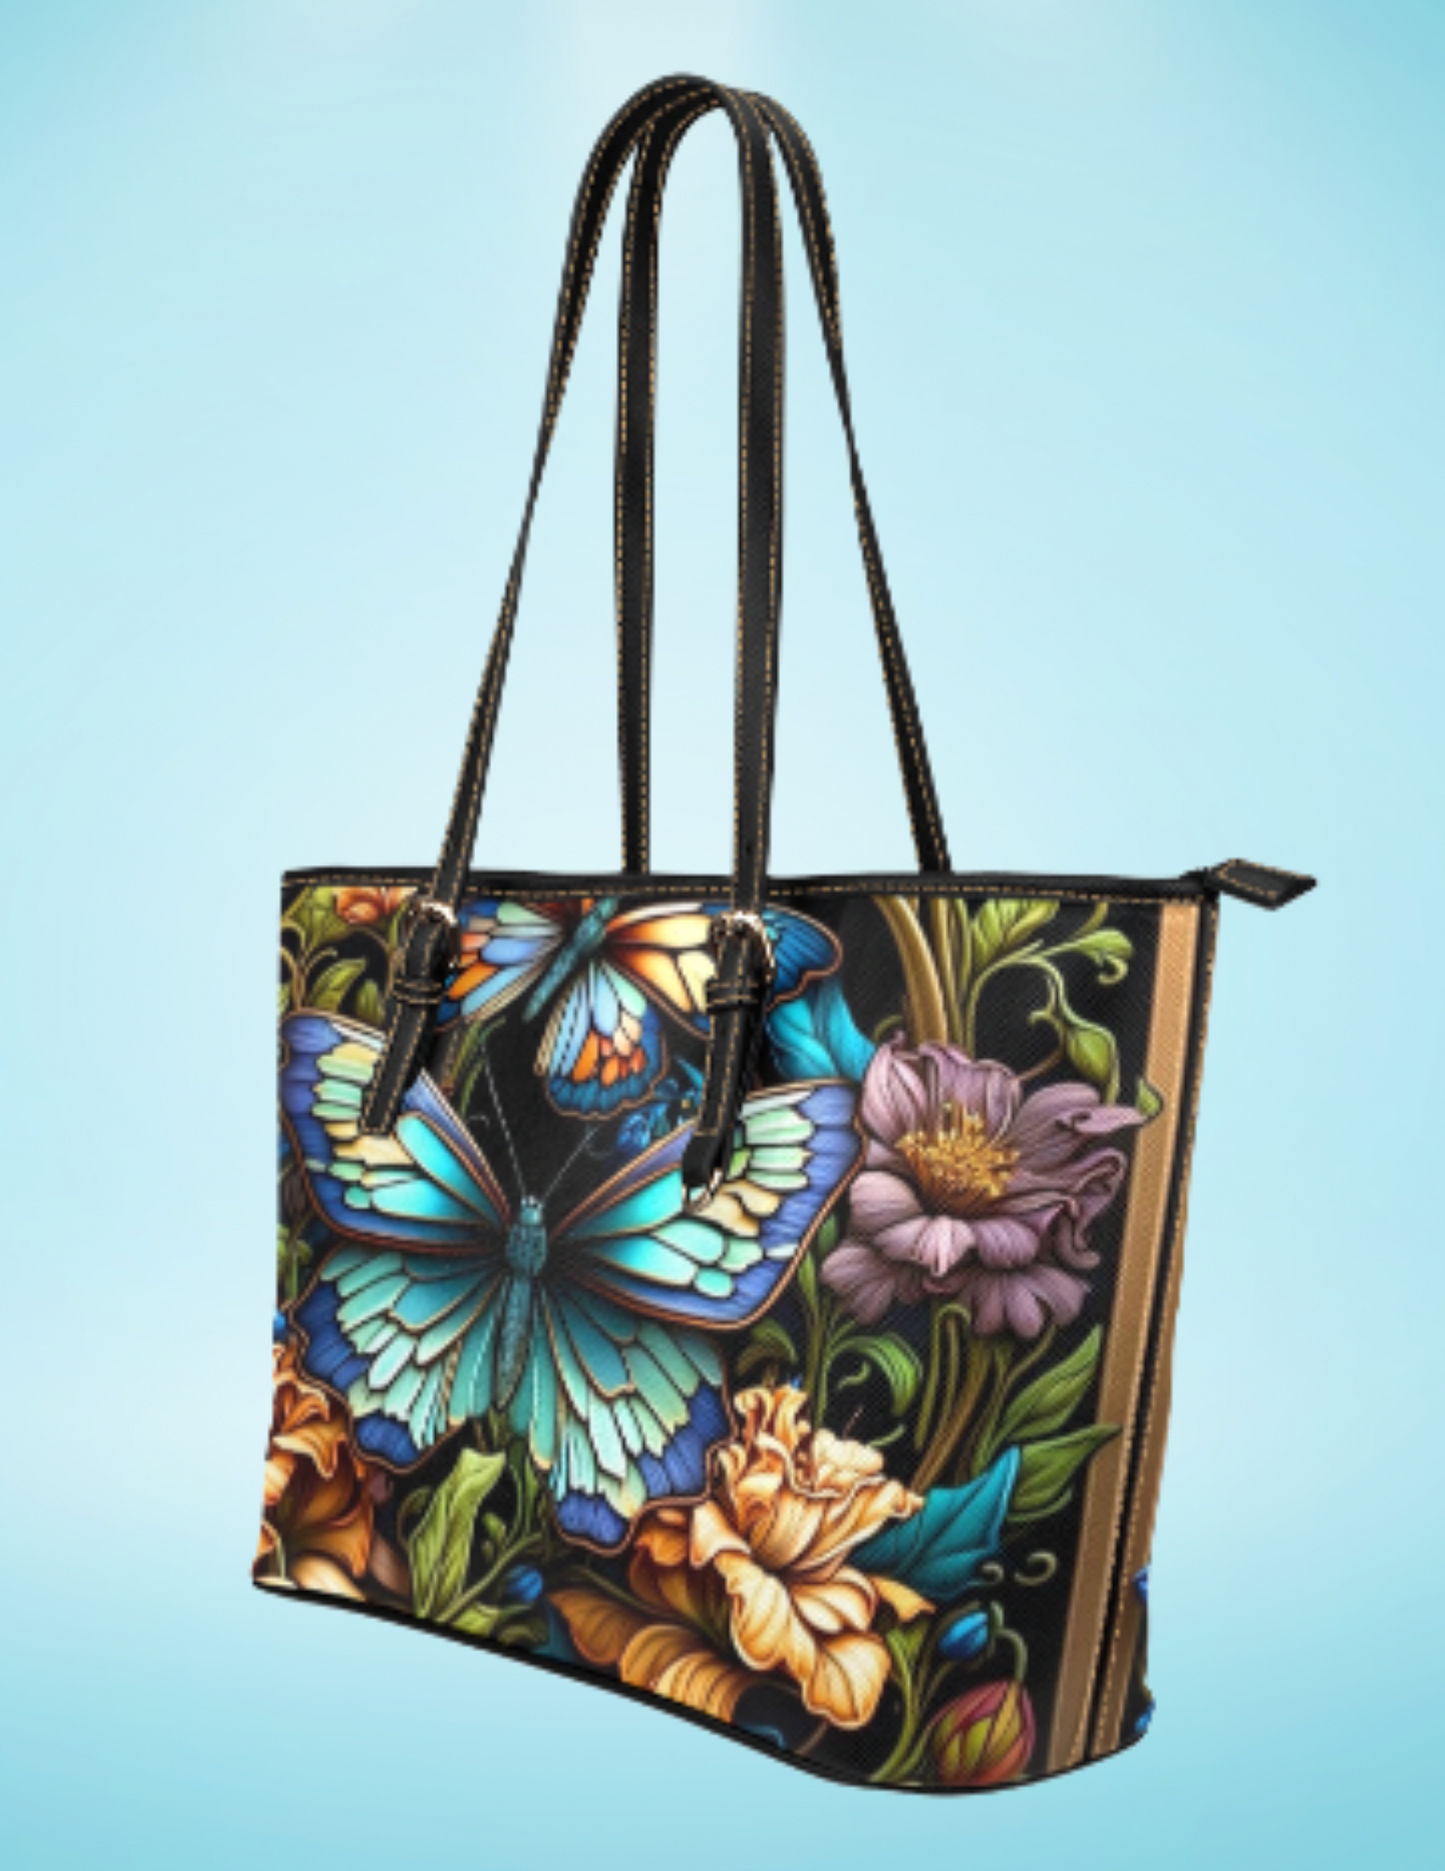 Beautiful Black and Blue Tote